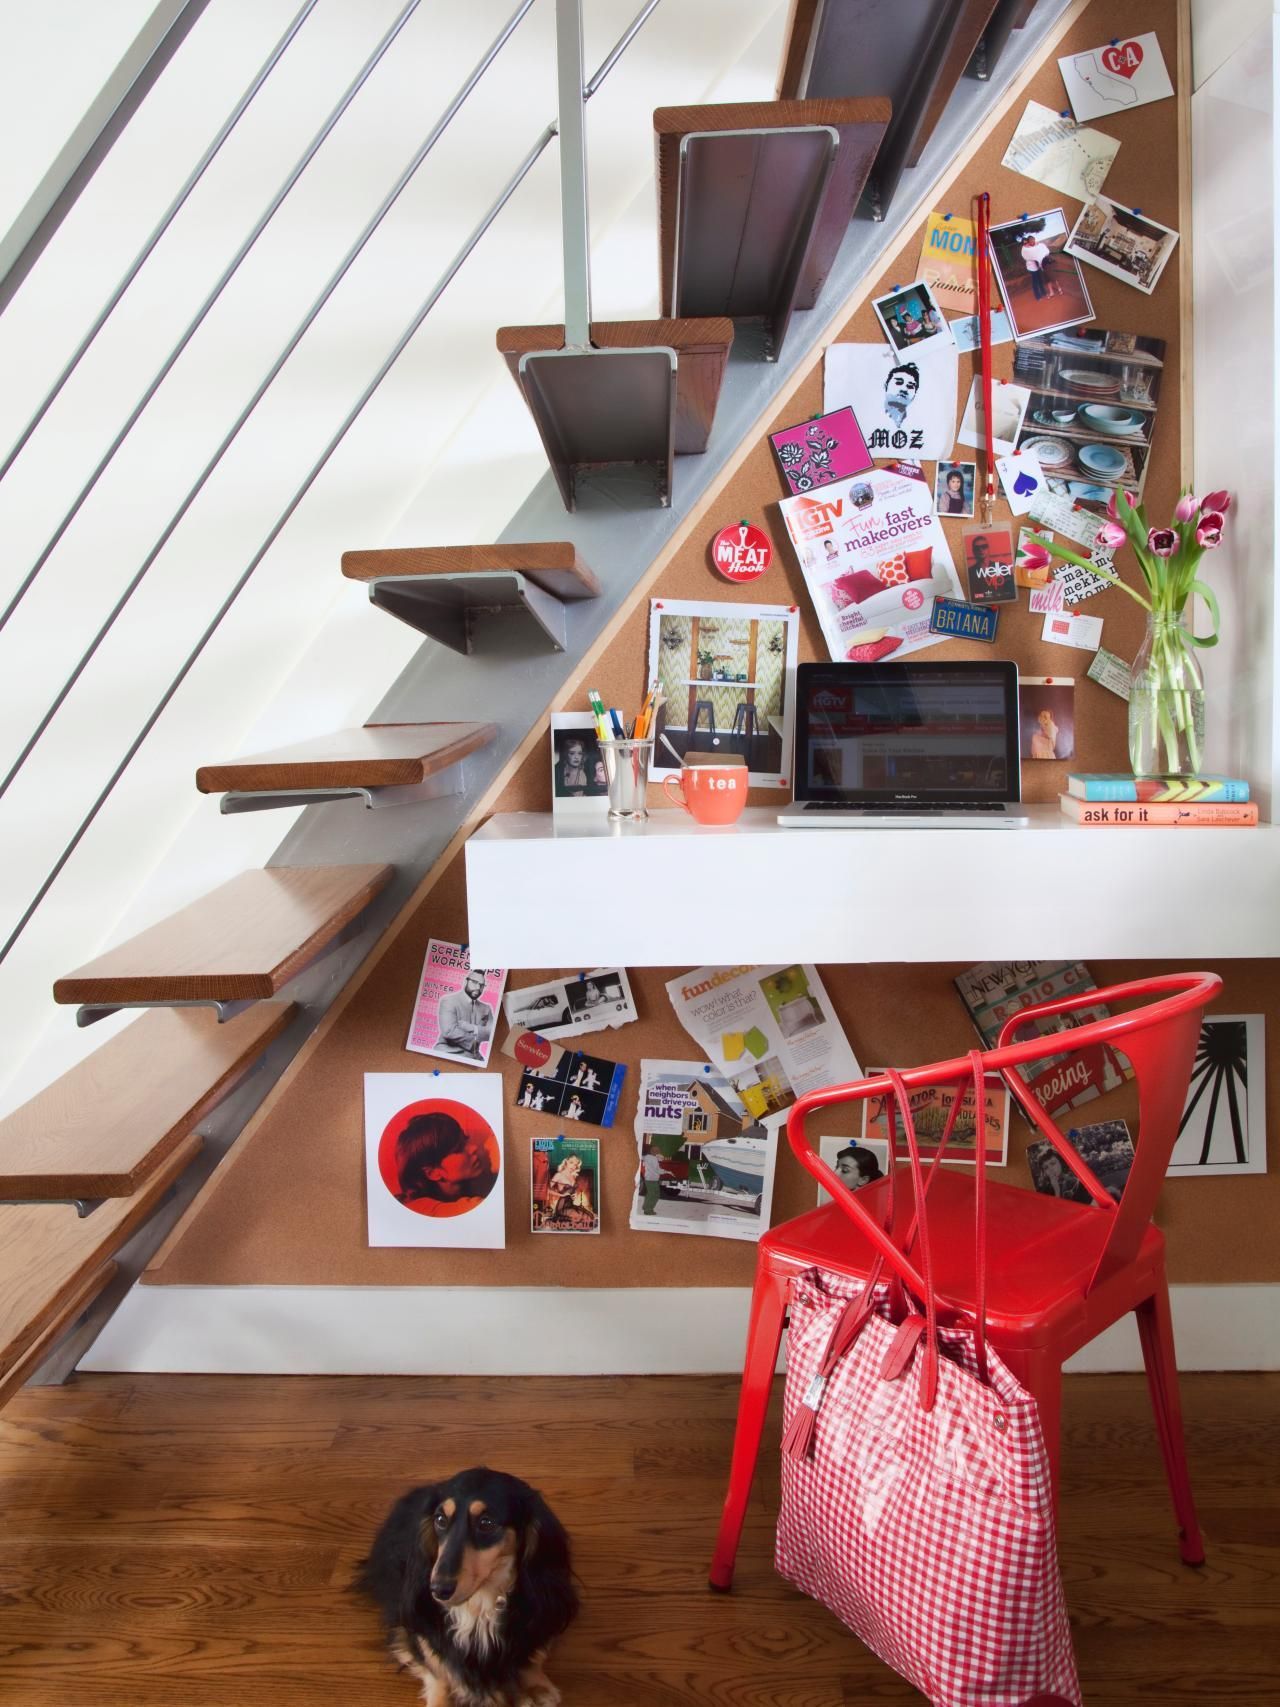 30 Nooks and Crannies That Will Inspire Organization